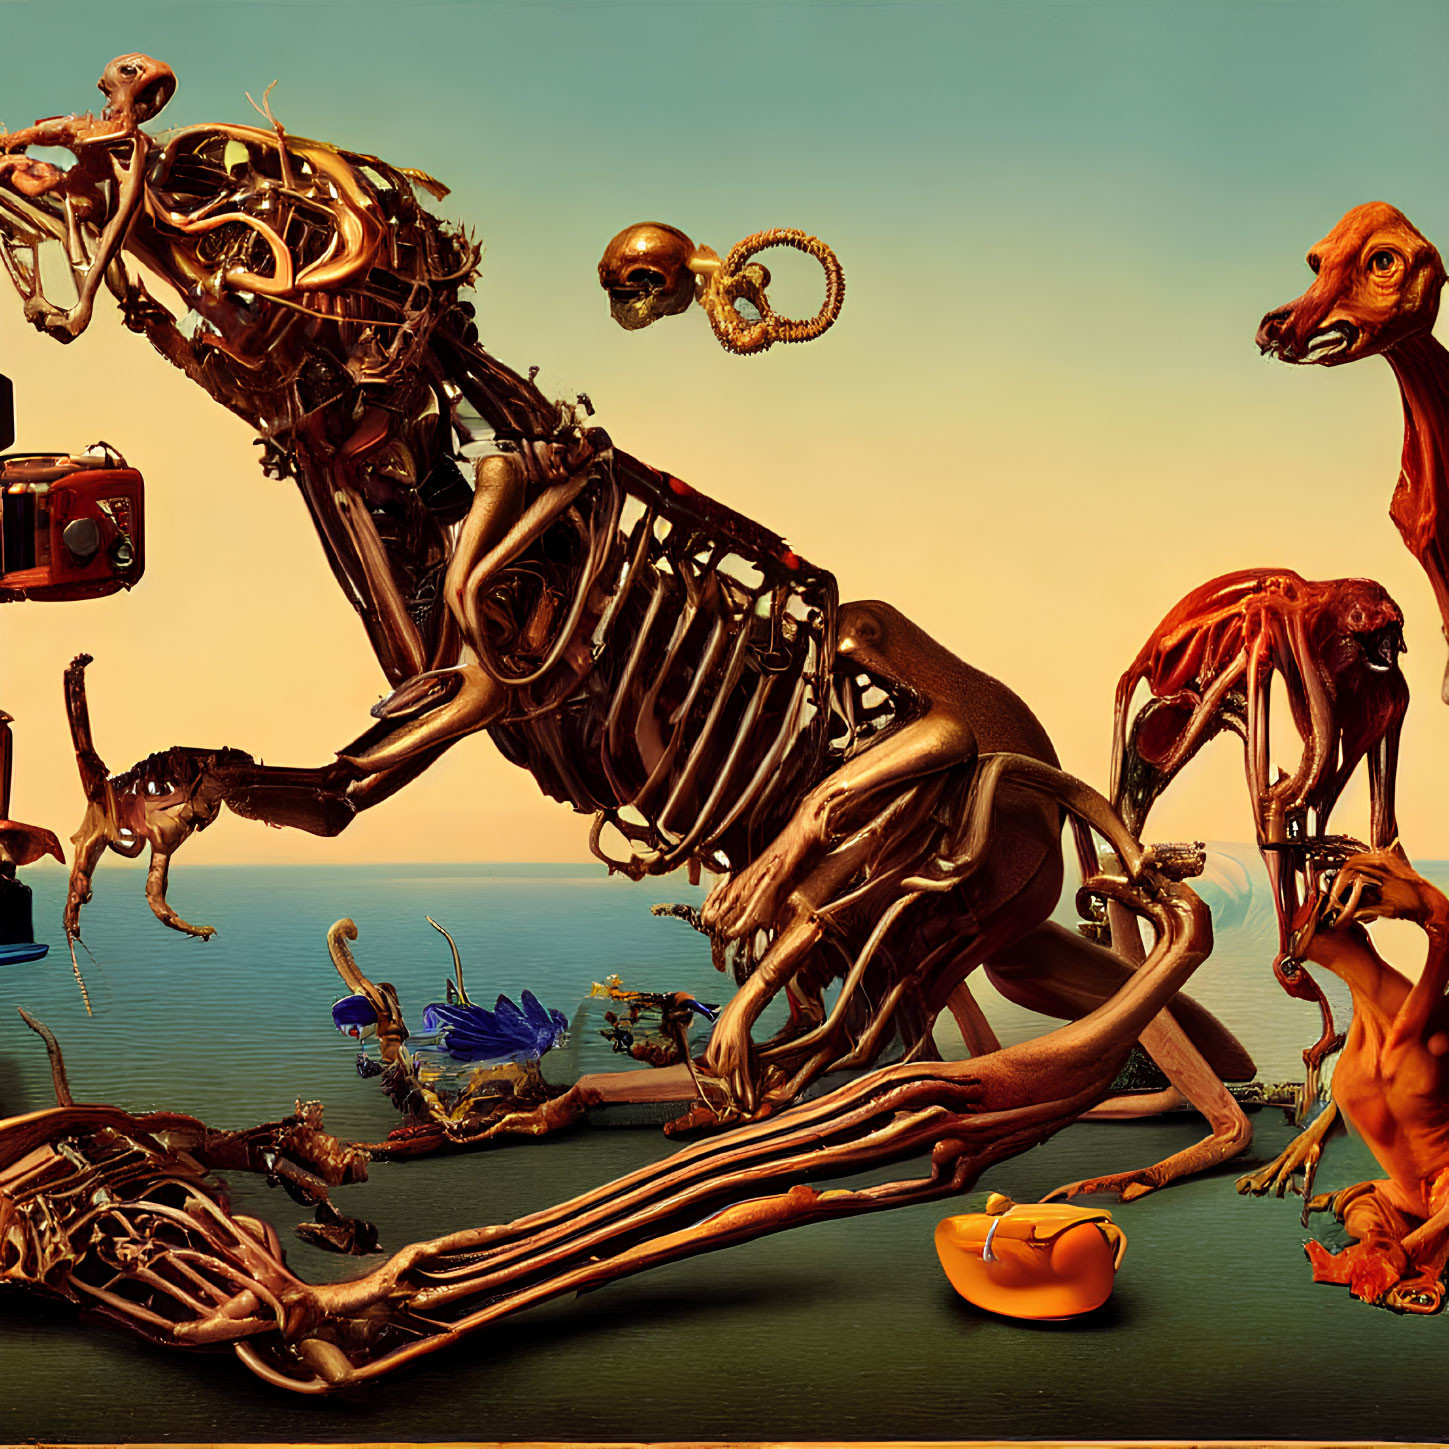 Surreal metallic skeletal creature with exposed muscles and objects on ochre backdrop